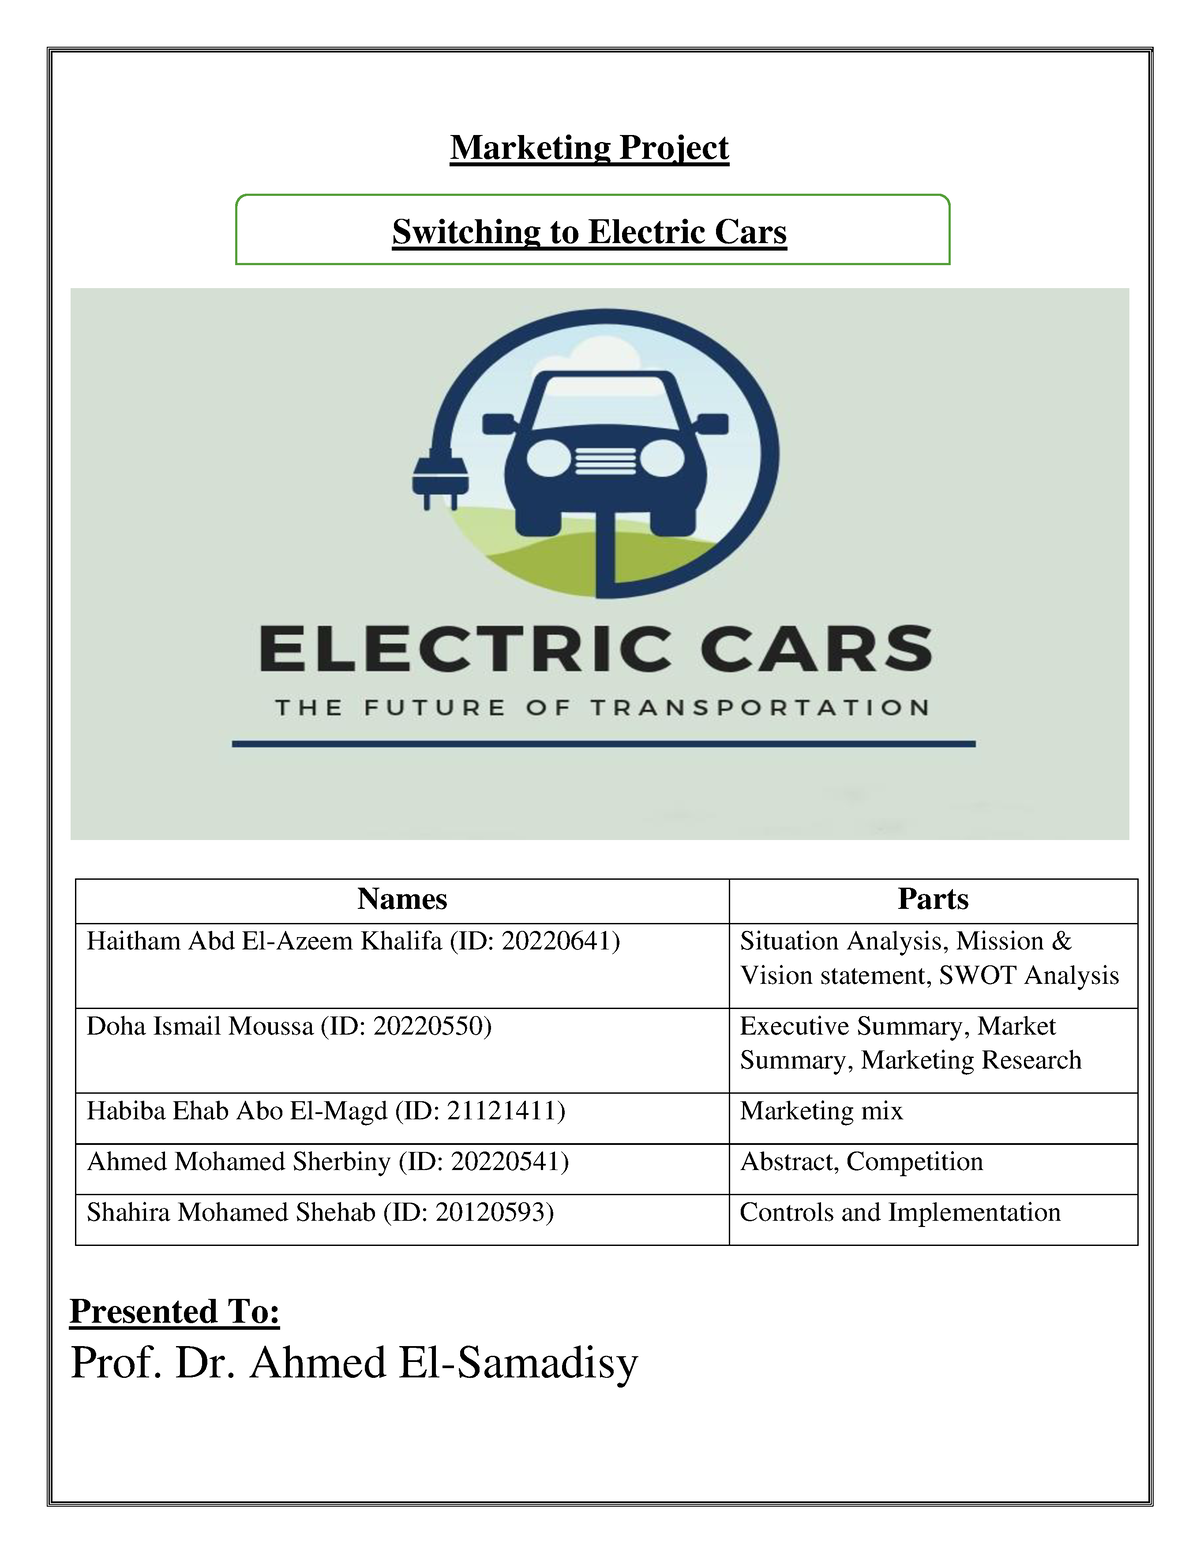 Marketing Plan for Electric Car Marketing Project Switching to